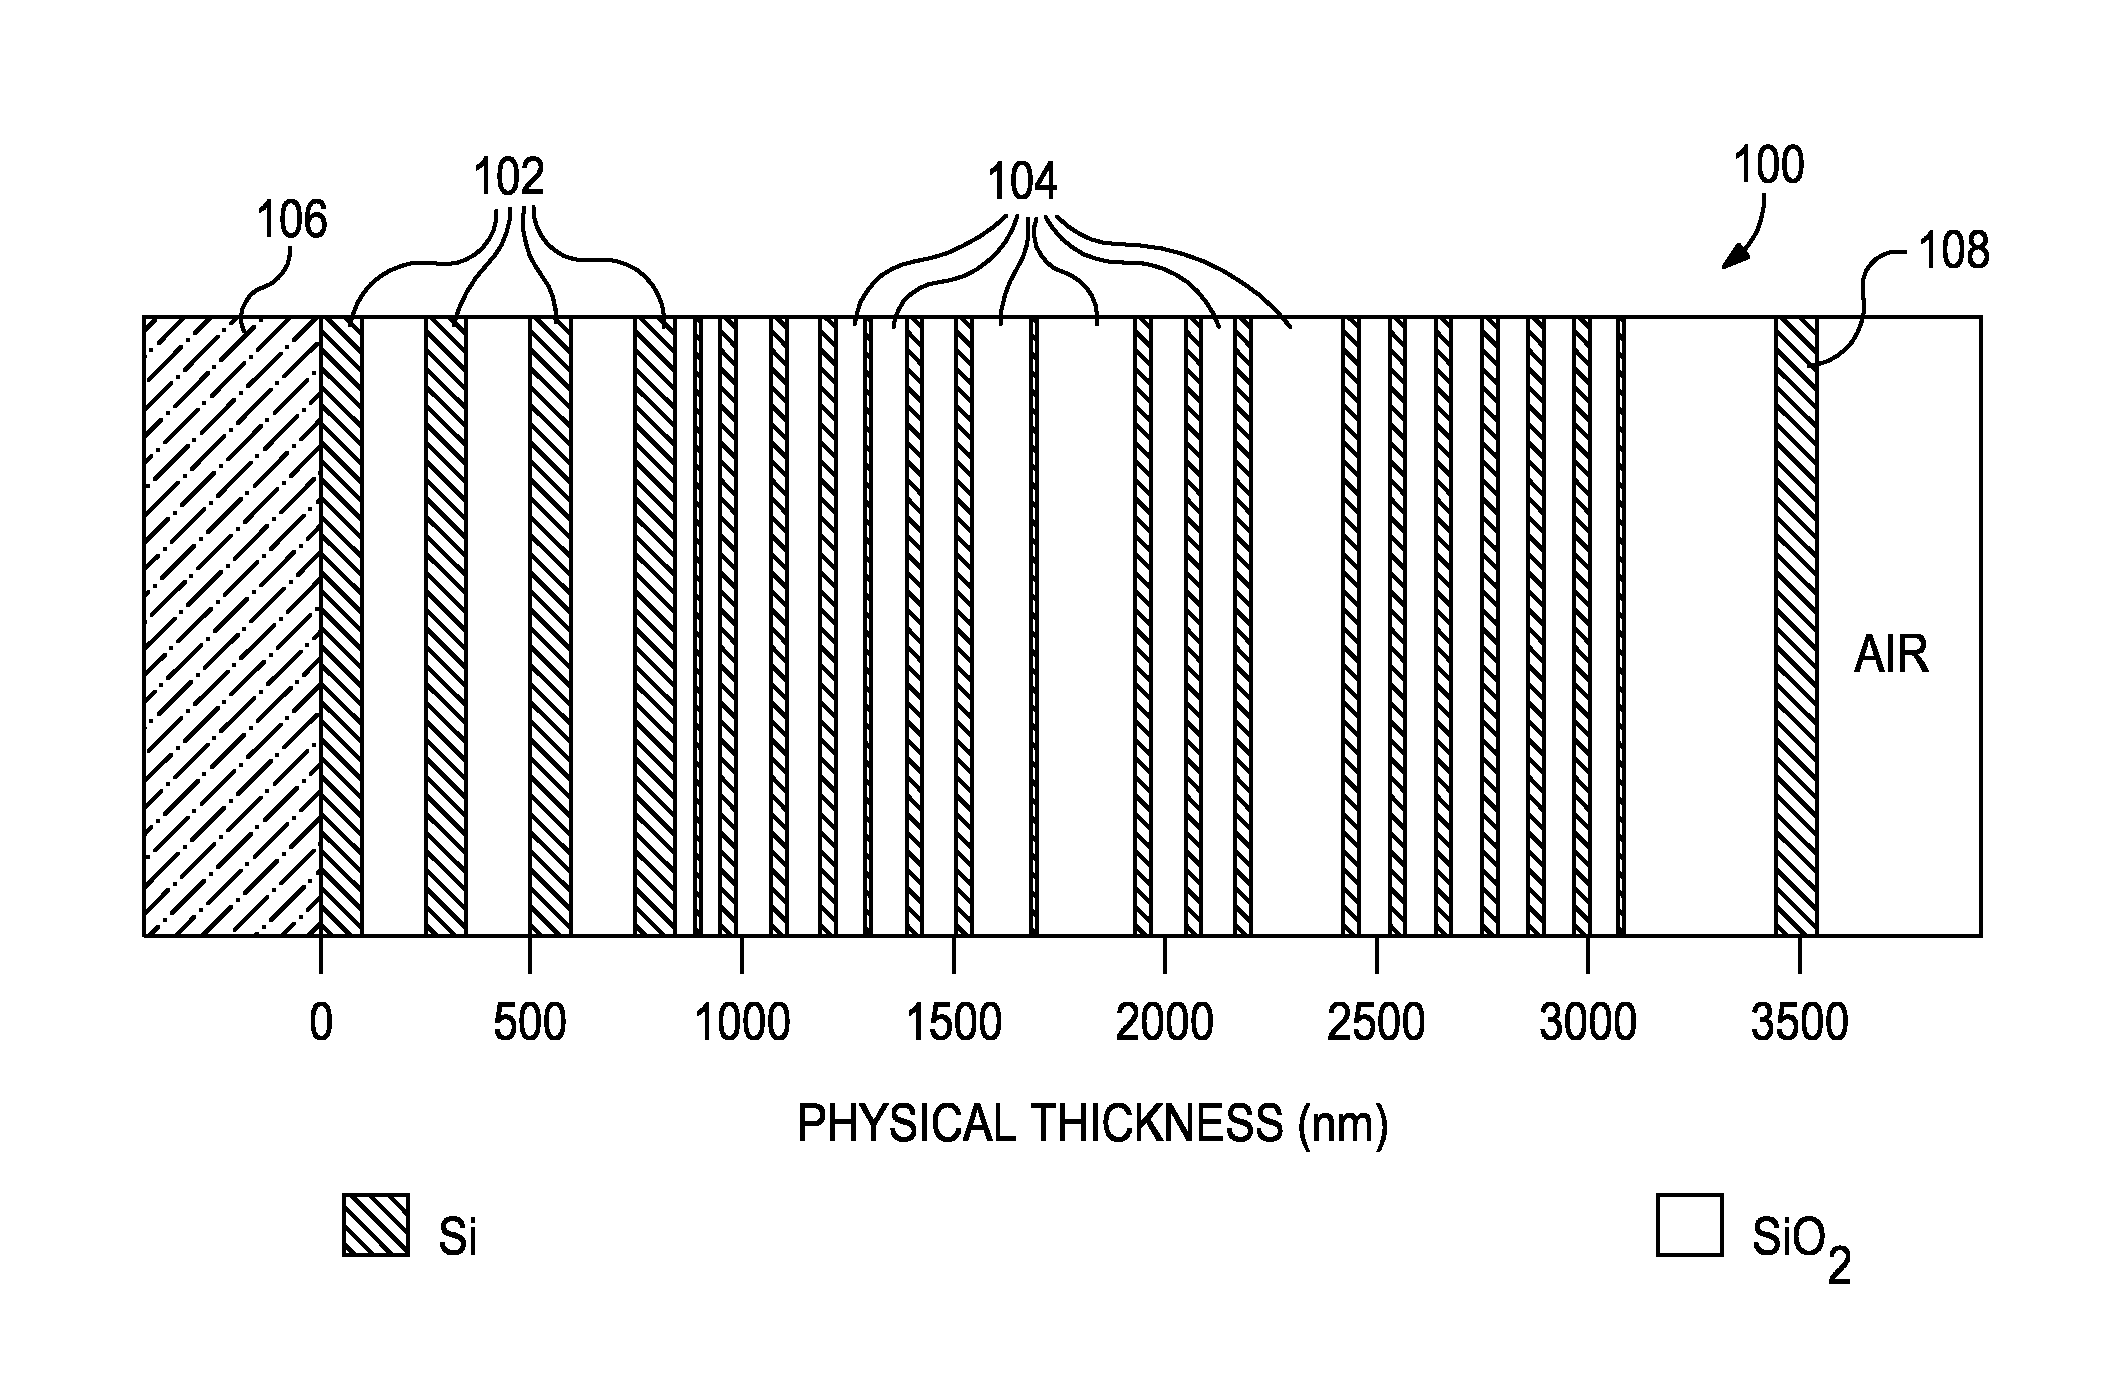 Imaging systems for optical computing devices